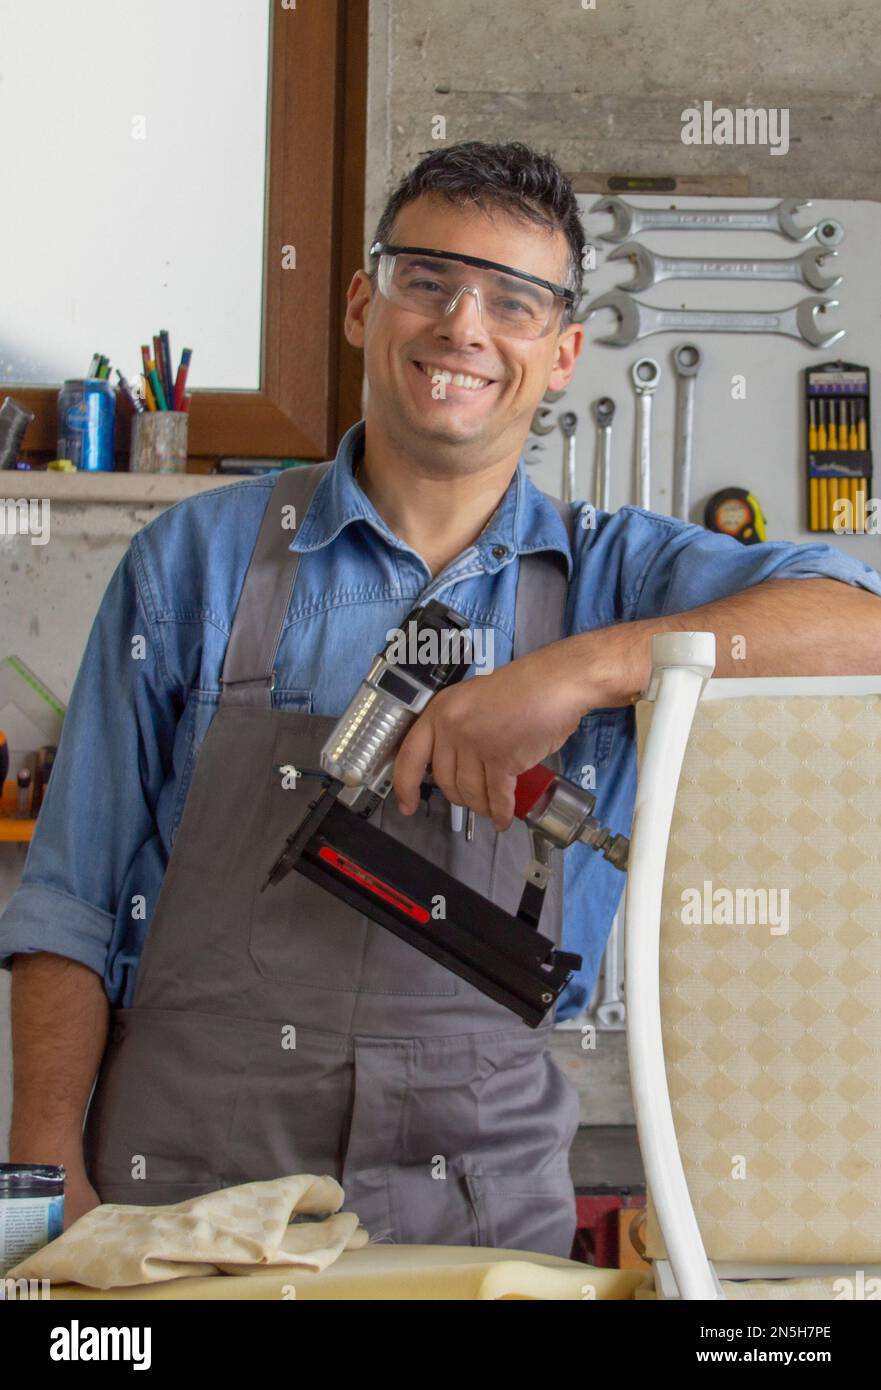 Smiling upholsterer in his workshop with various tools and nail gun after restoring an old chair. Stock Photo